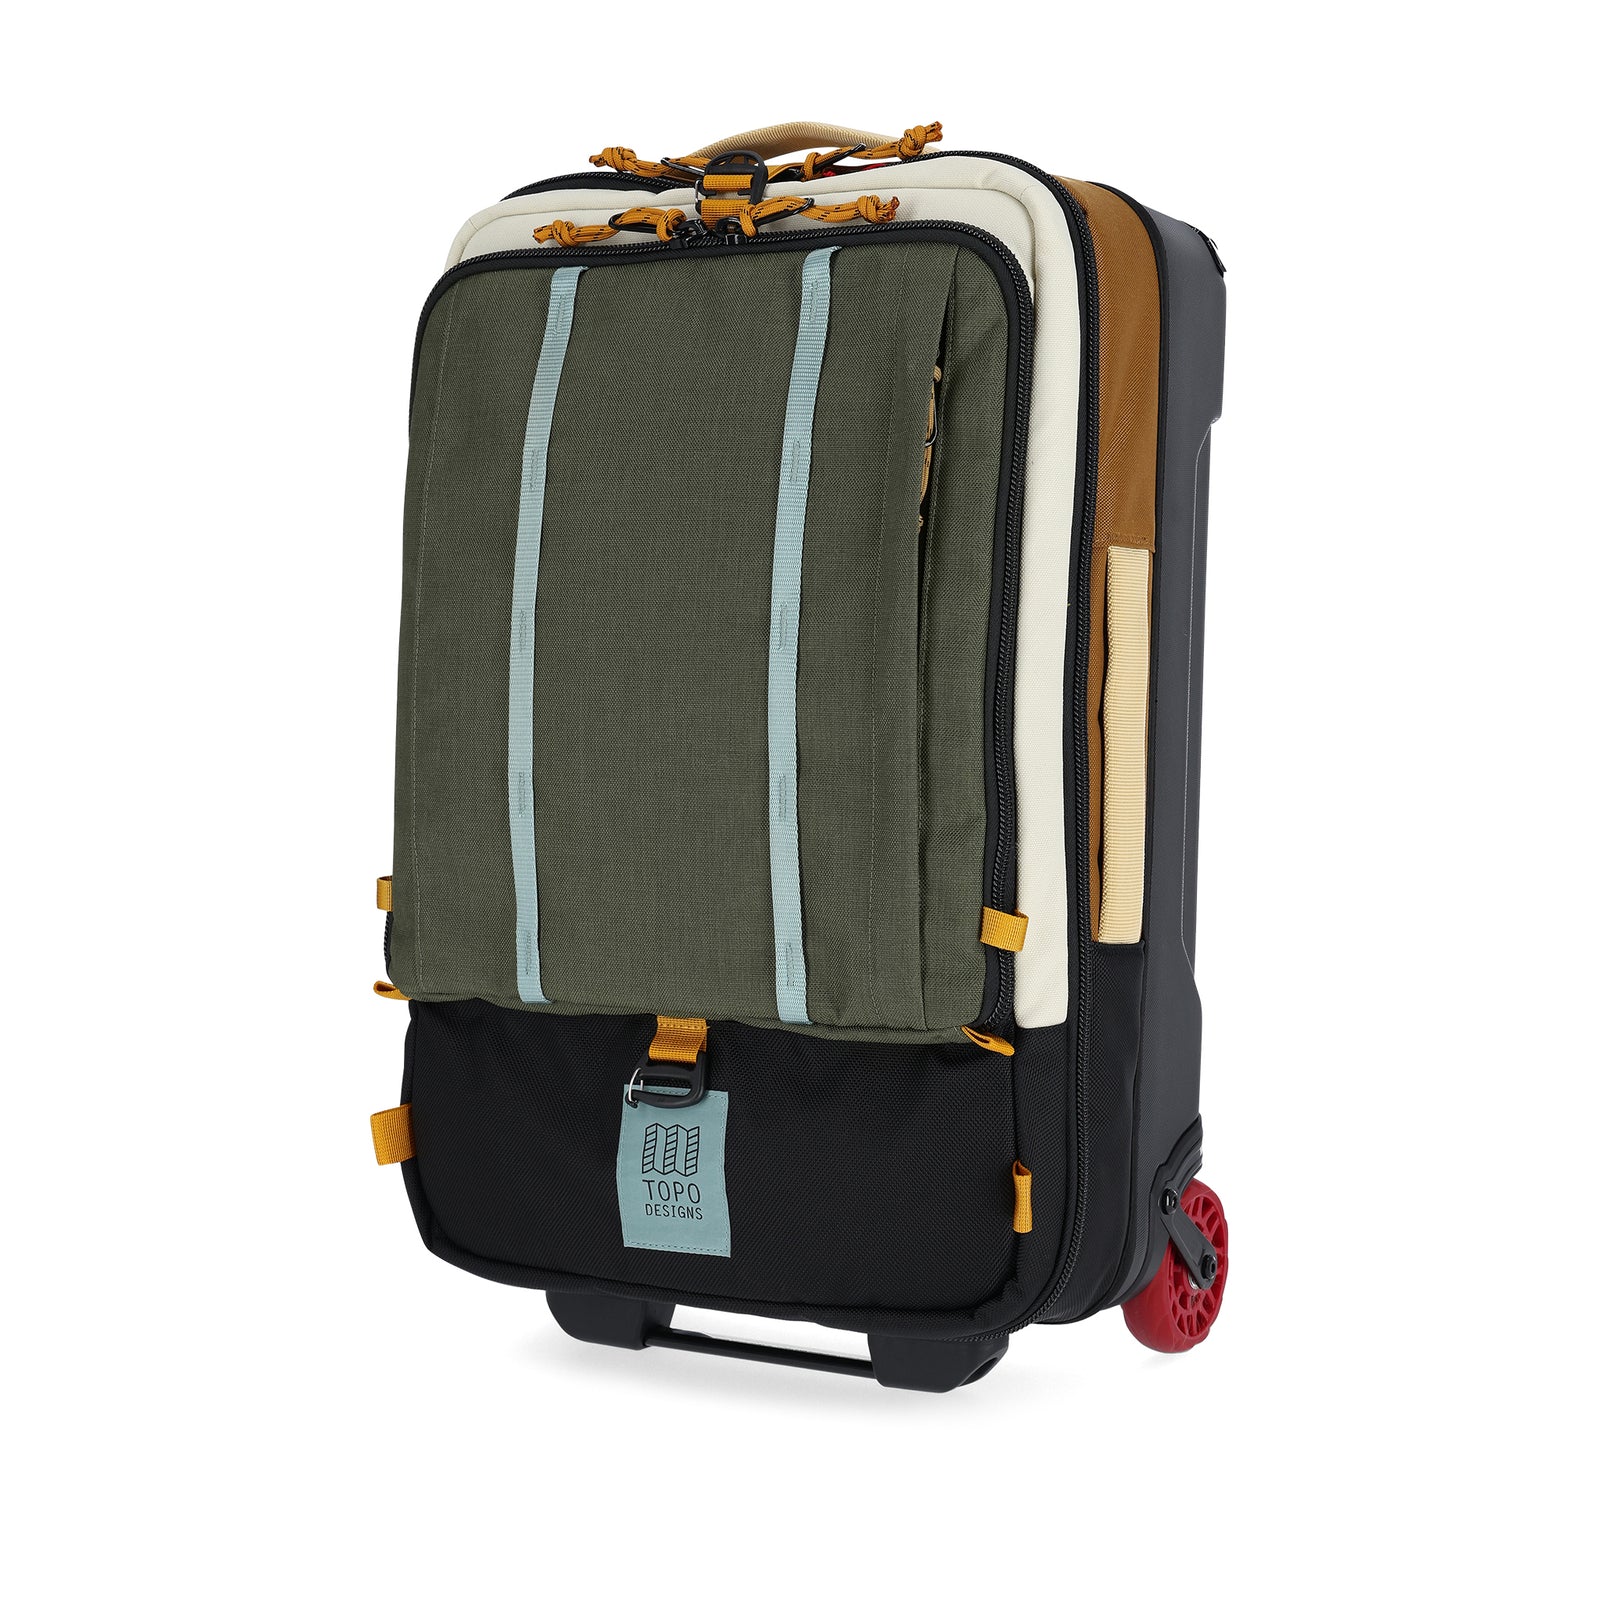 Front View of Topo Designs Global Travel Bag Roller  in "Bone White / Olive"